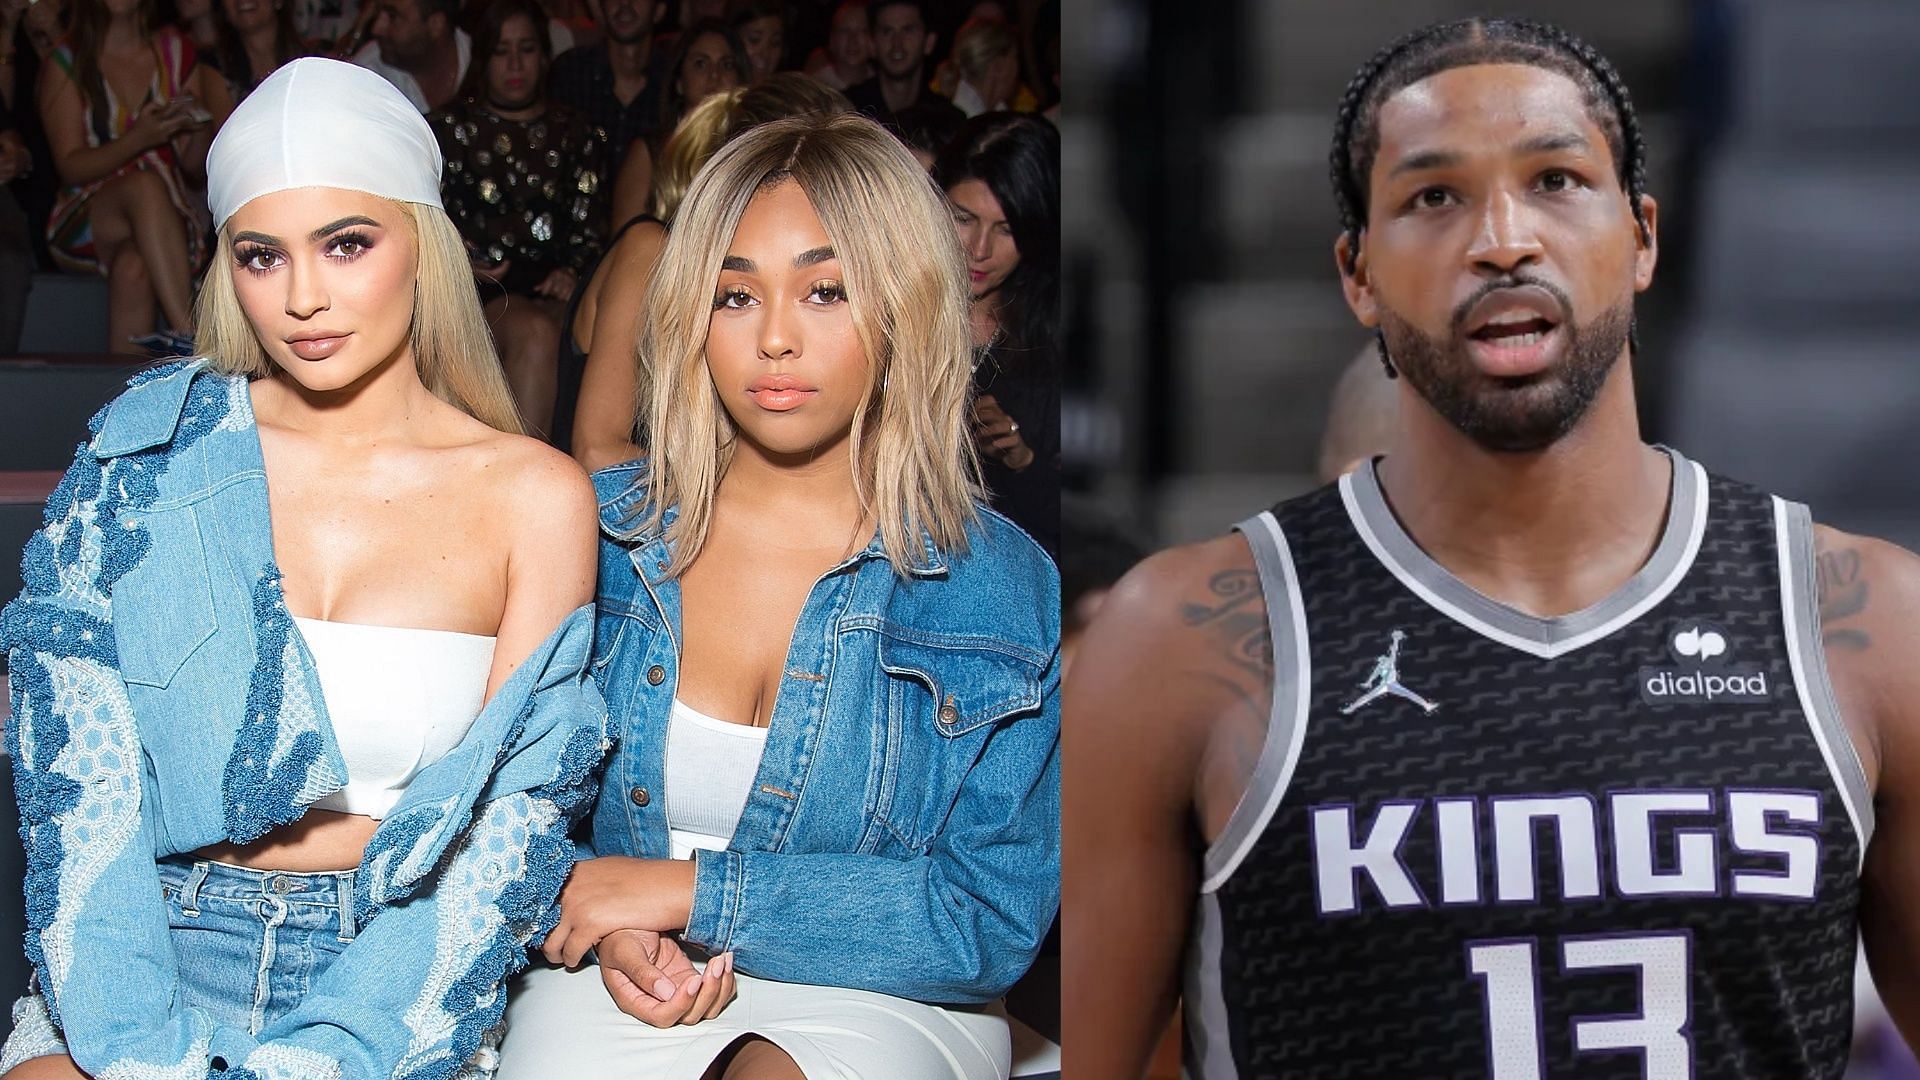 Kylie Jenner, Jordyn Woods and Tristan Thompson. (Photo via Getty Images)